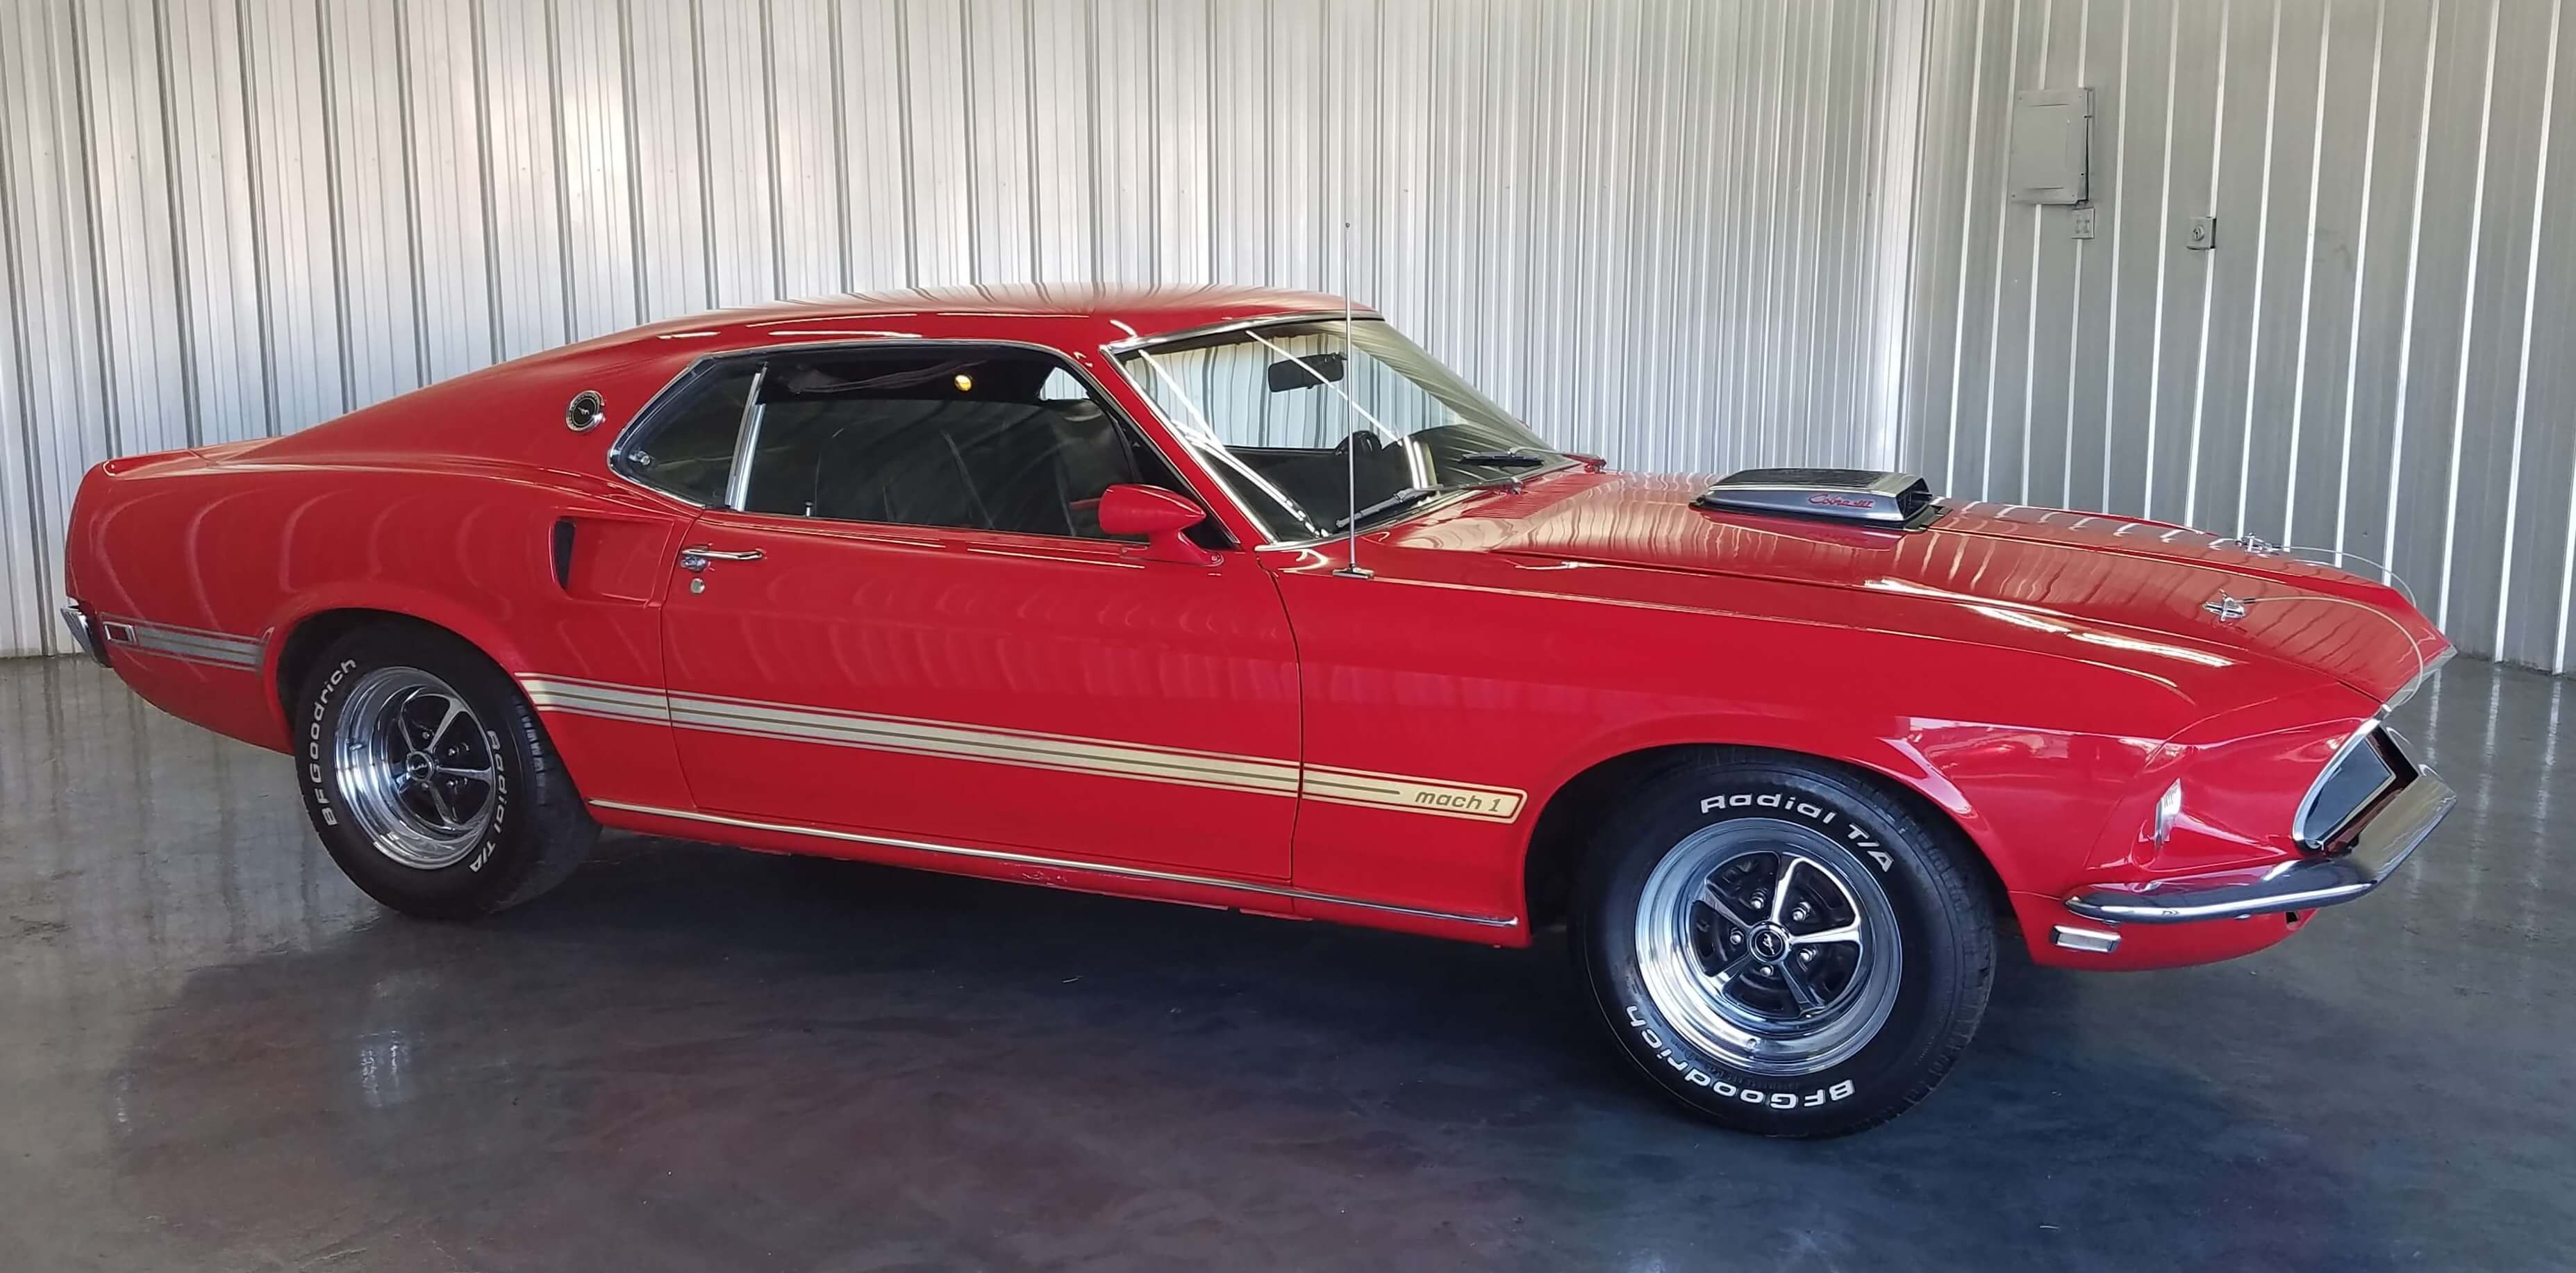 Duane's 1969 Ford Mustang - Holley My Garage